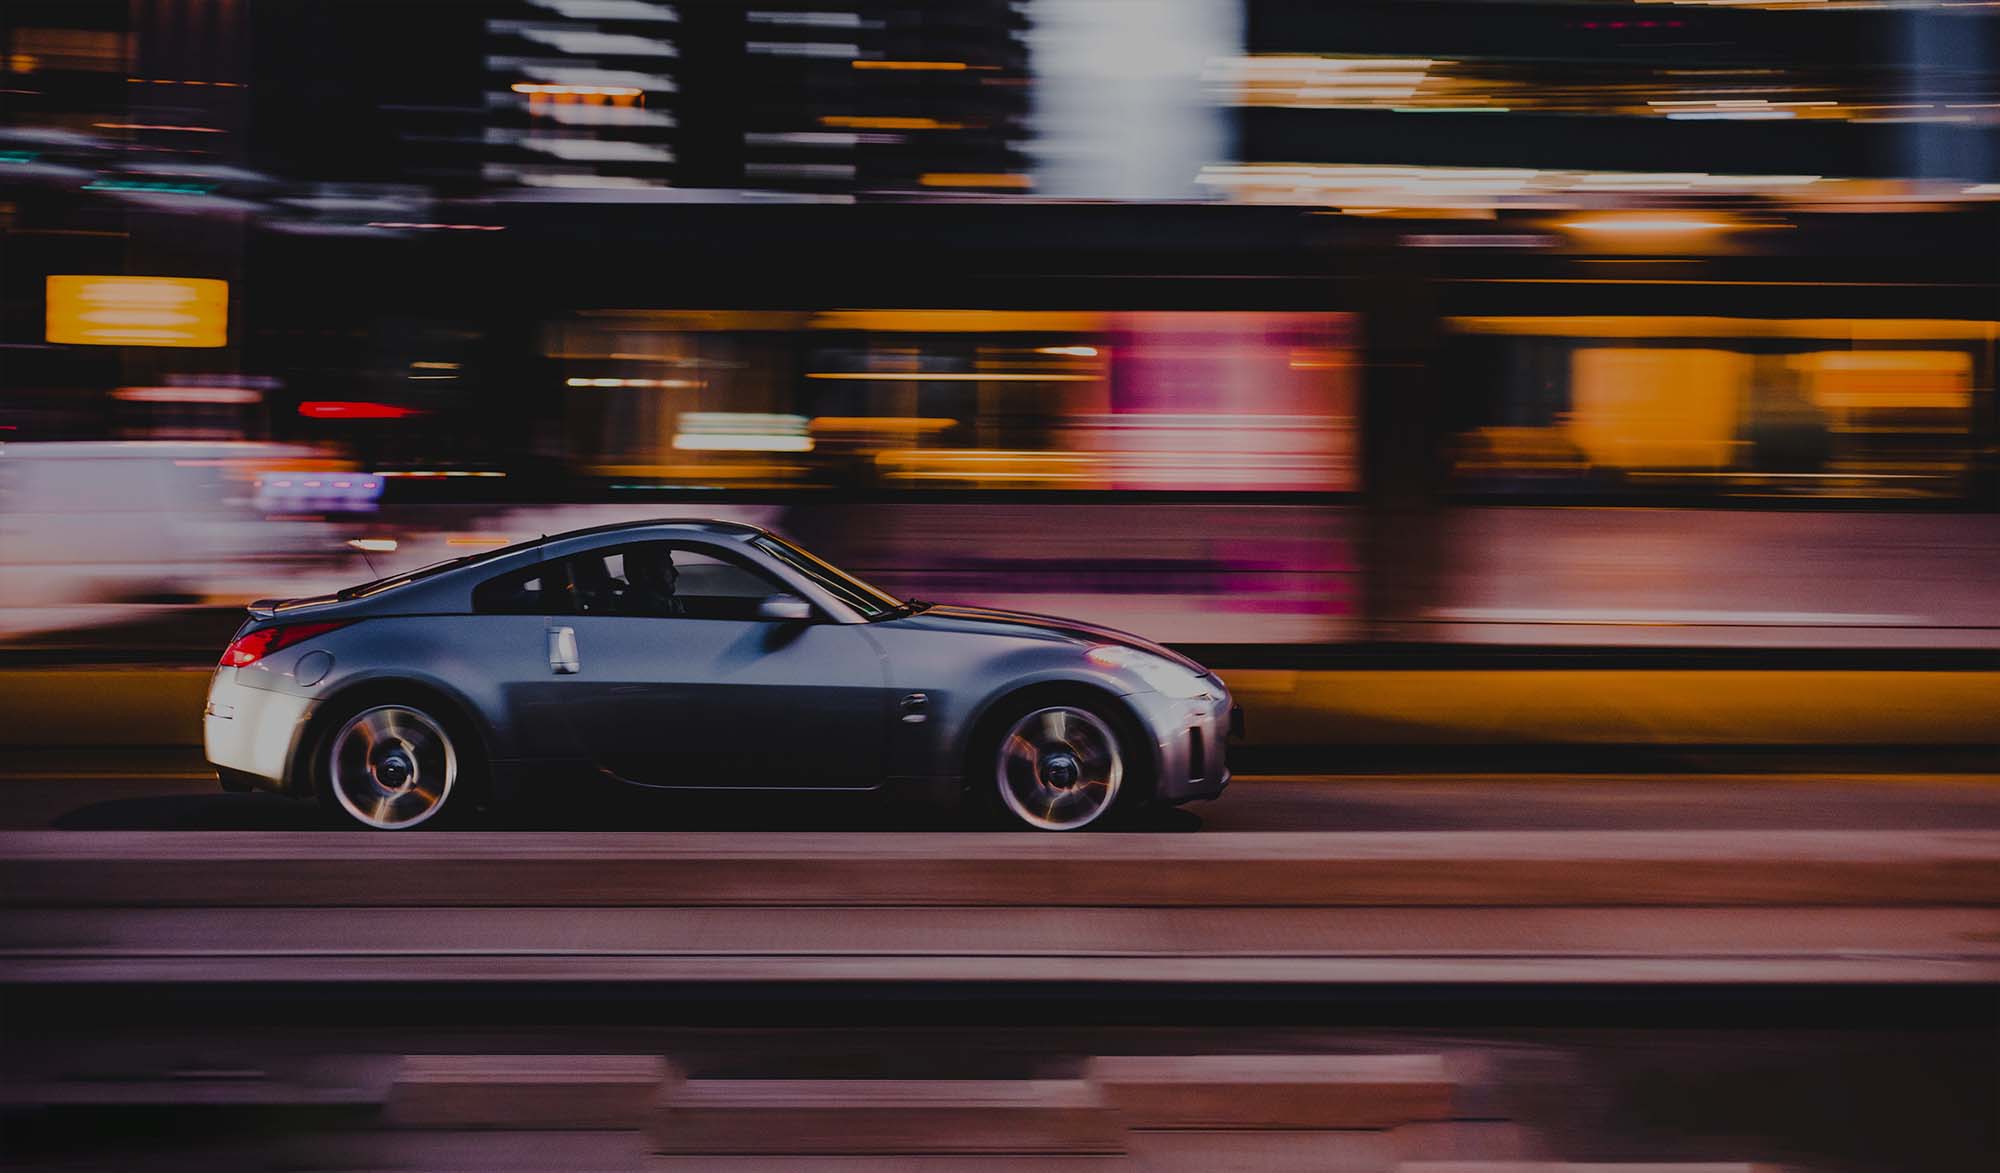 Fast car driving in the city at night with motion blur